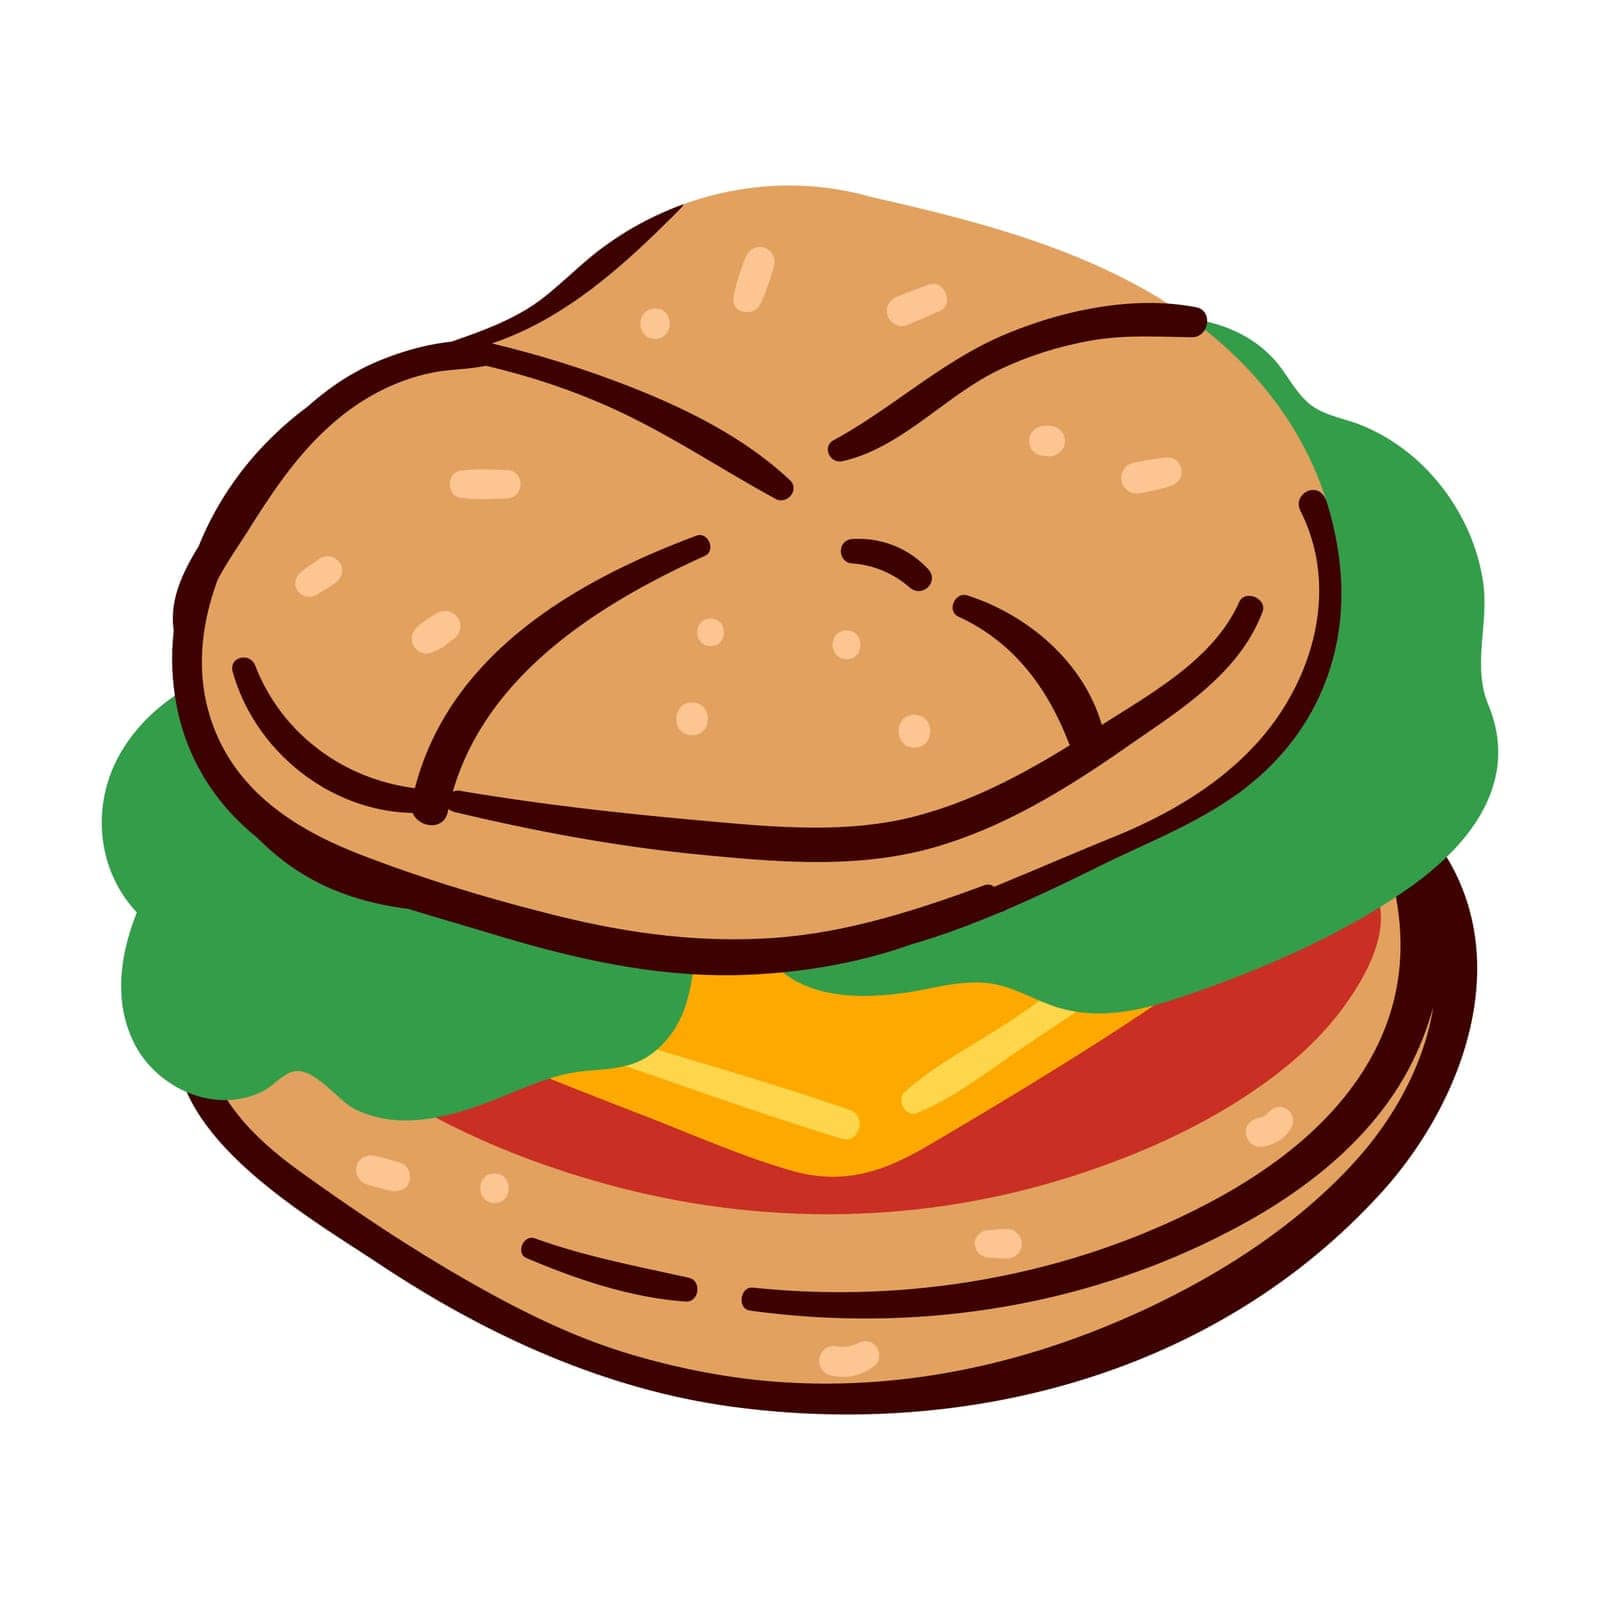 Sandwich or cheeseburger served in restaurant or diner. Isolated icon of prepared food, snack in menu. Bun with salad leaves, tomato slice and cheese. Prepared takeaway meal, vector in flat style